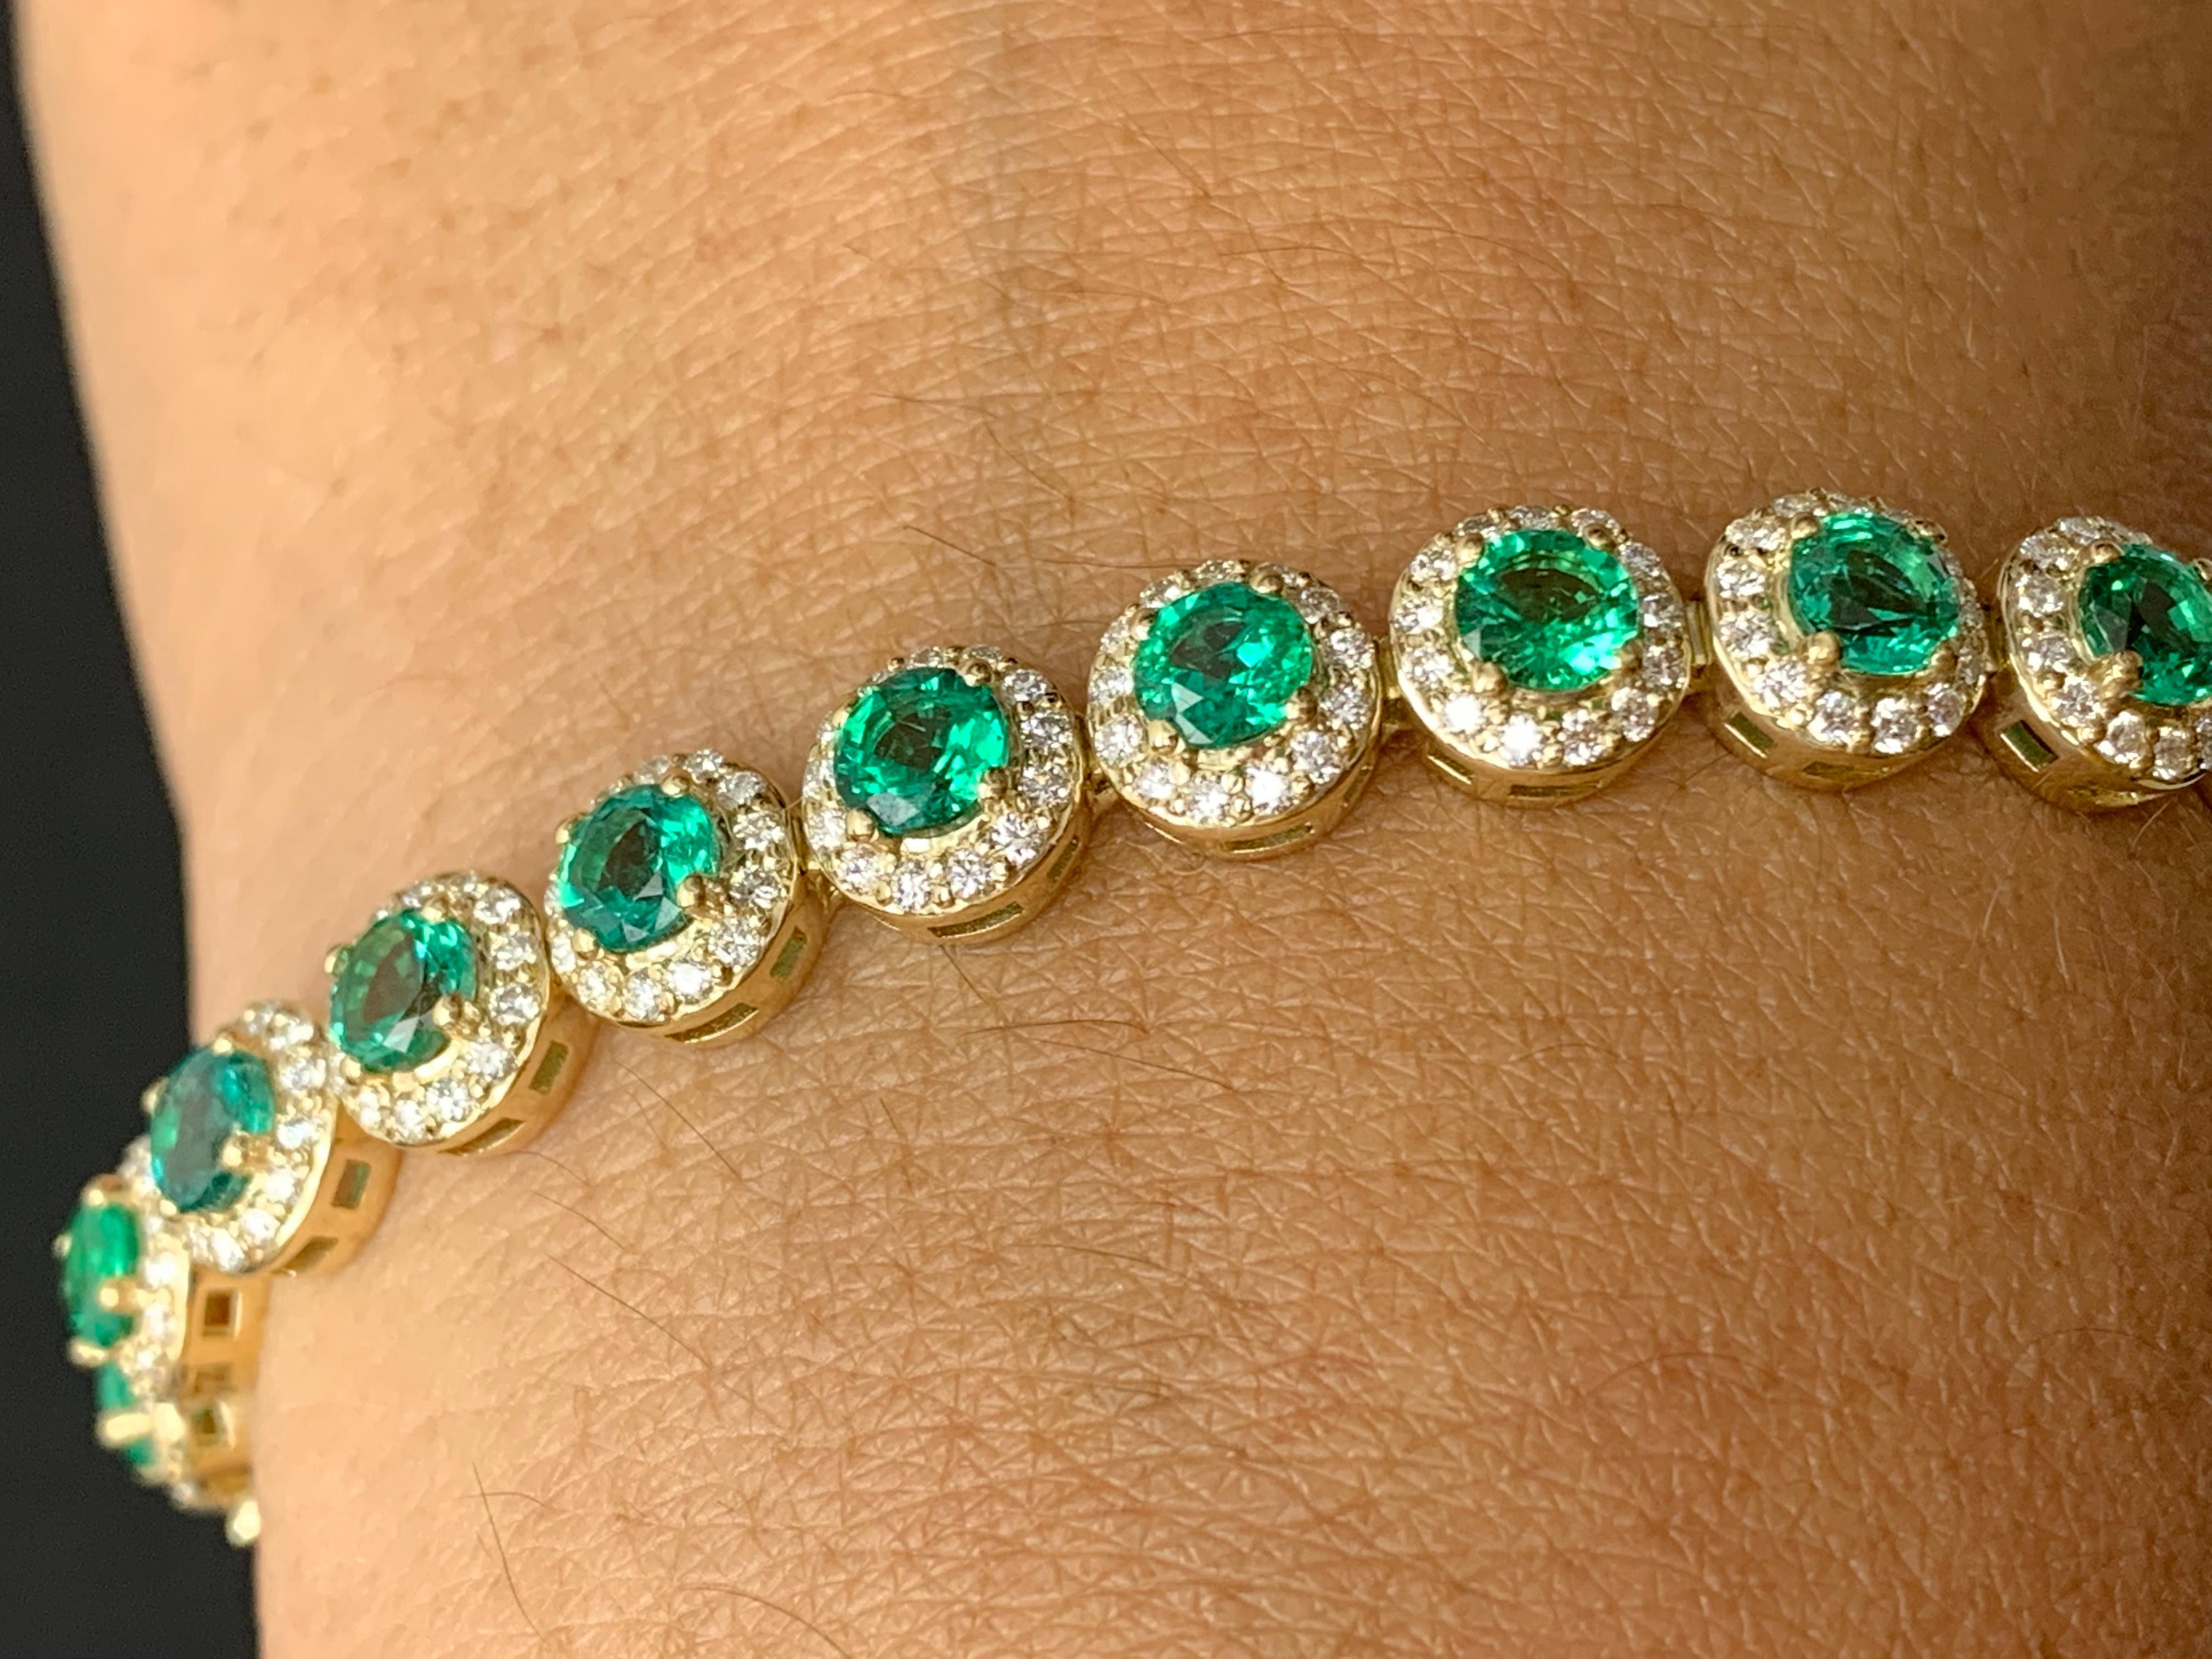 Contemporary 6.94 Carat Emerald and Diamond Halo Tennis Bracelet in 14k Yellow Gold For Sale